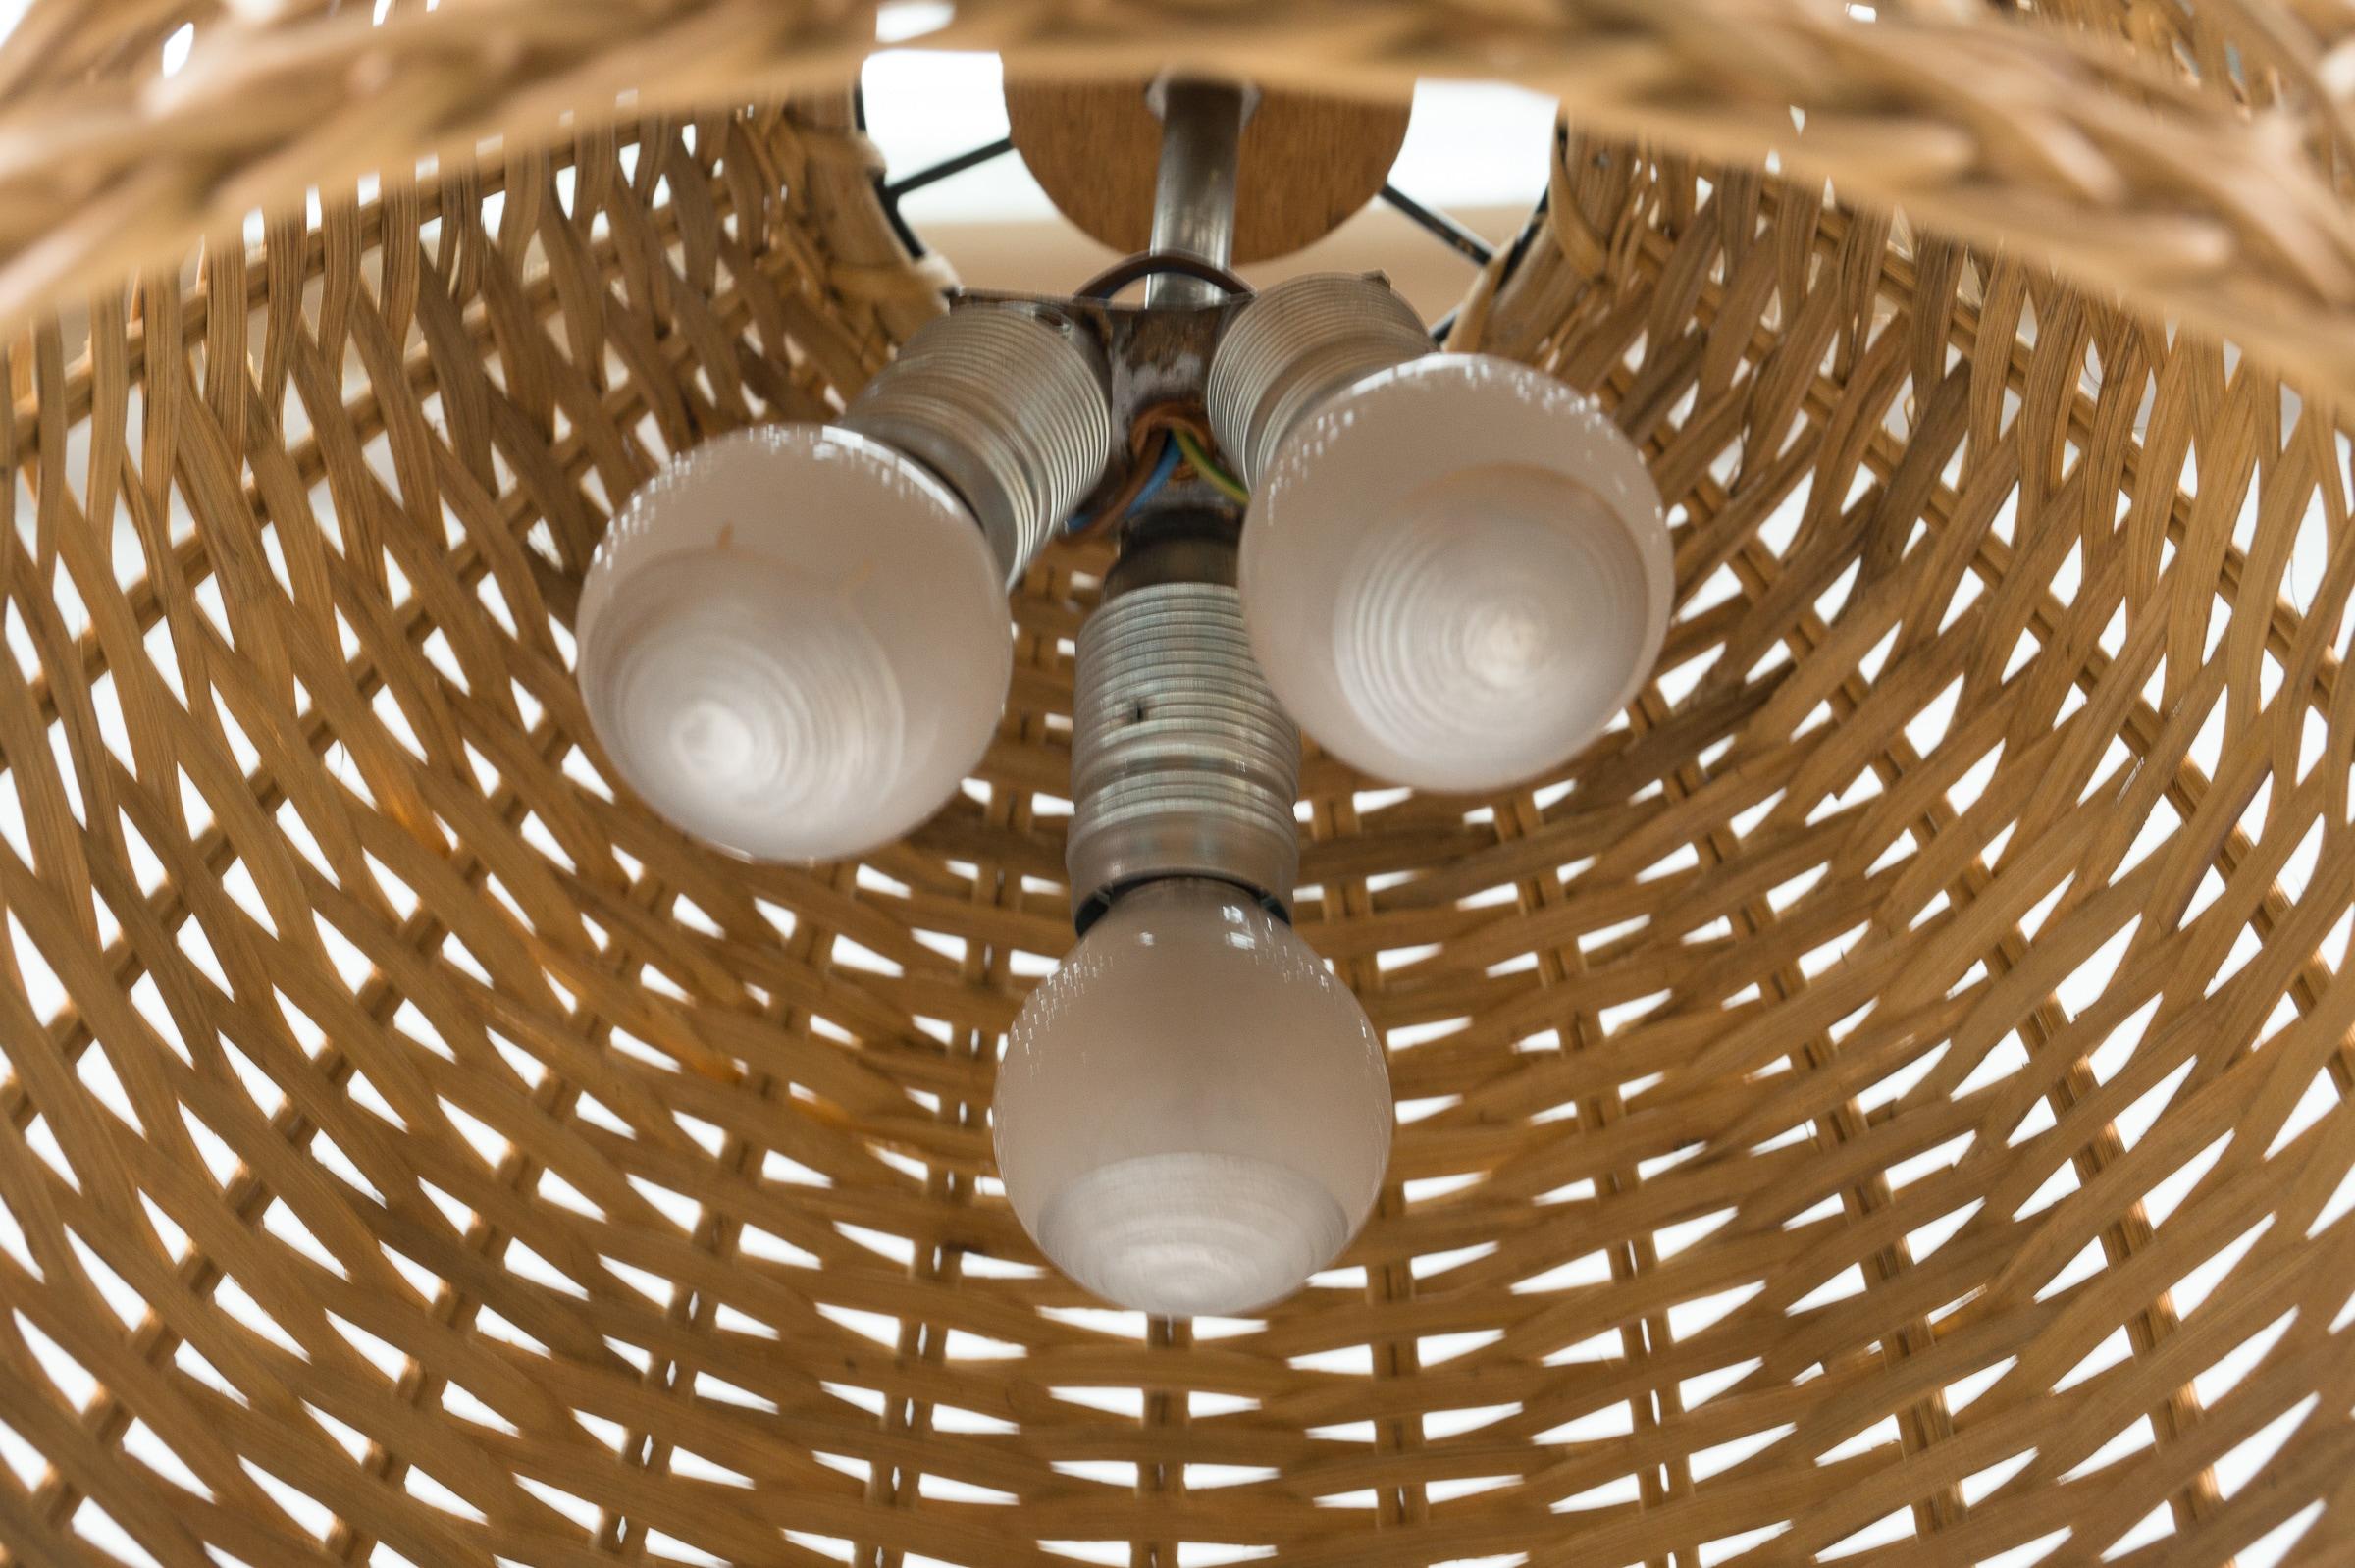 Mid-20th Century Lovely Mid-Century Modern Wicker Pendant Lamp, 1960s Italy For Sale